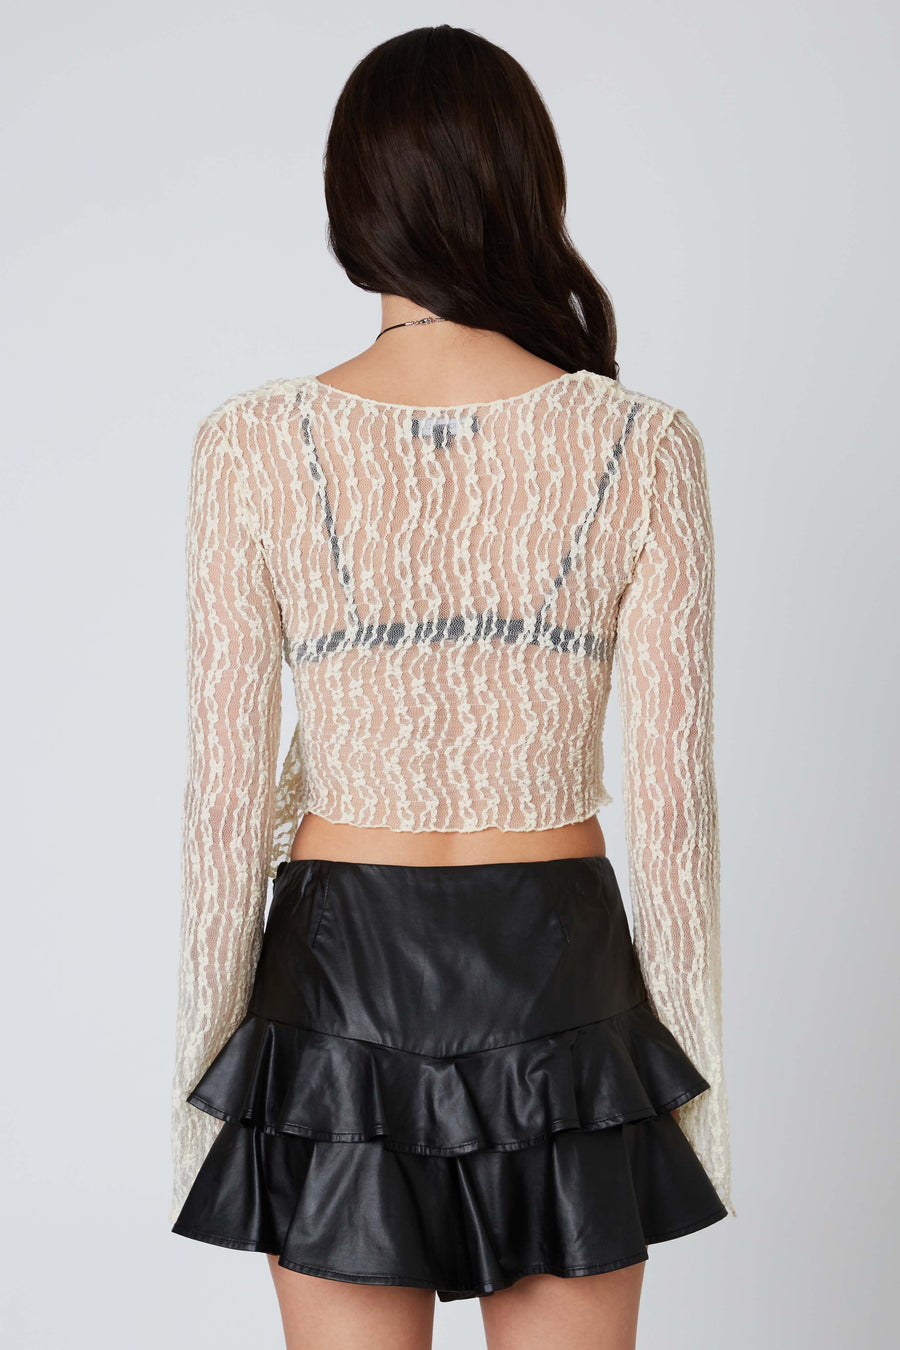 Sheer lace cropped top with plunging neckline and bell sleeves.